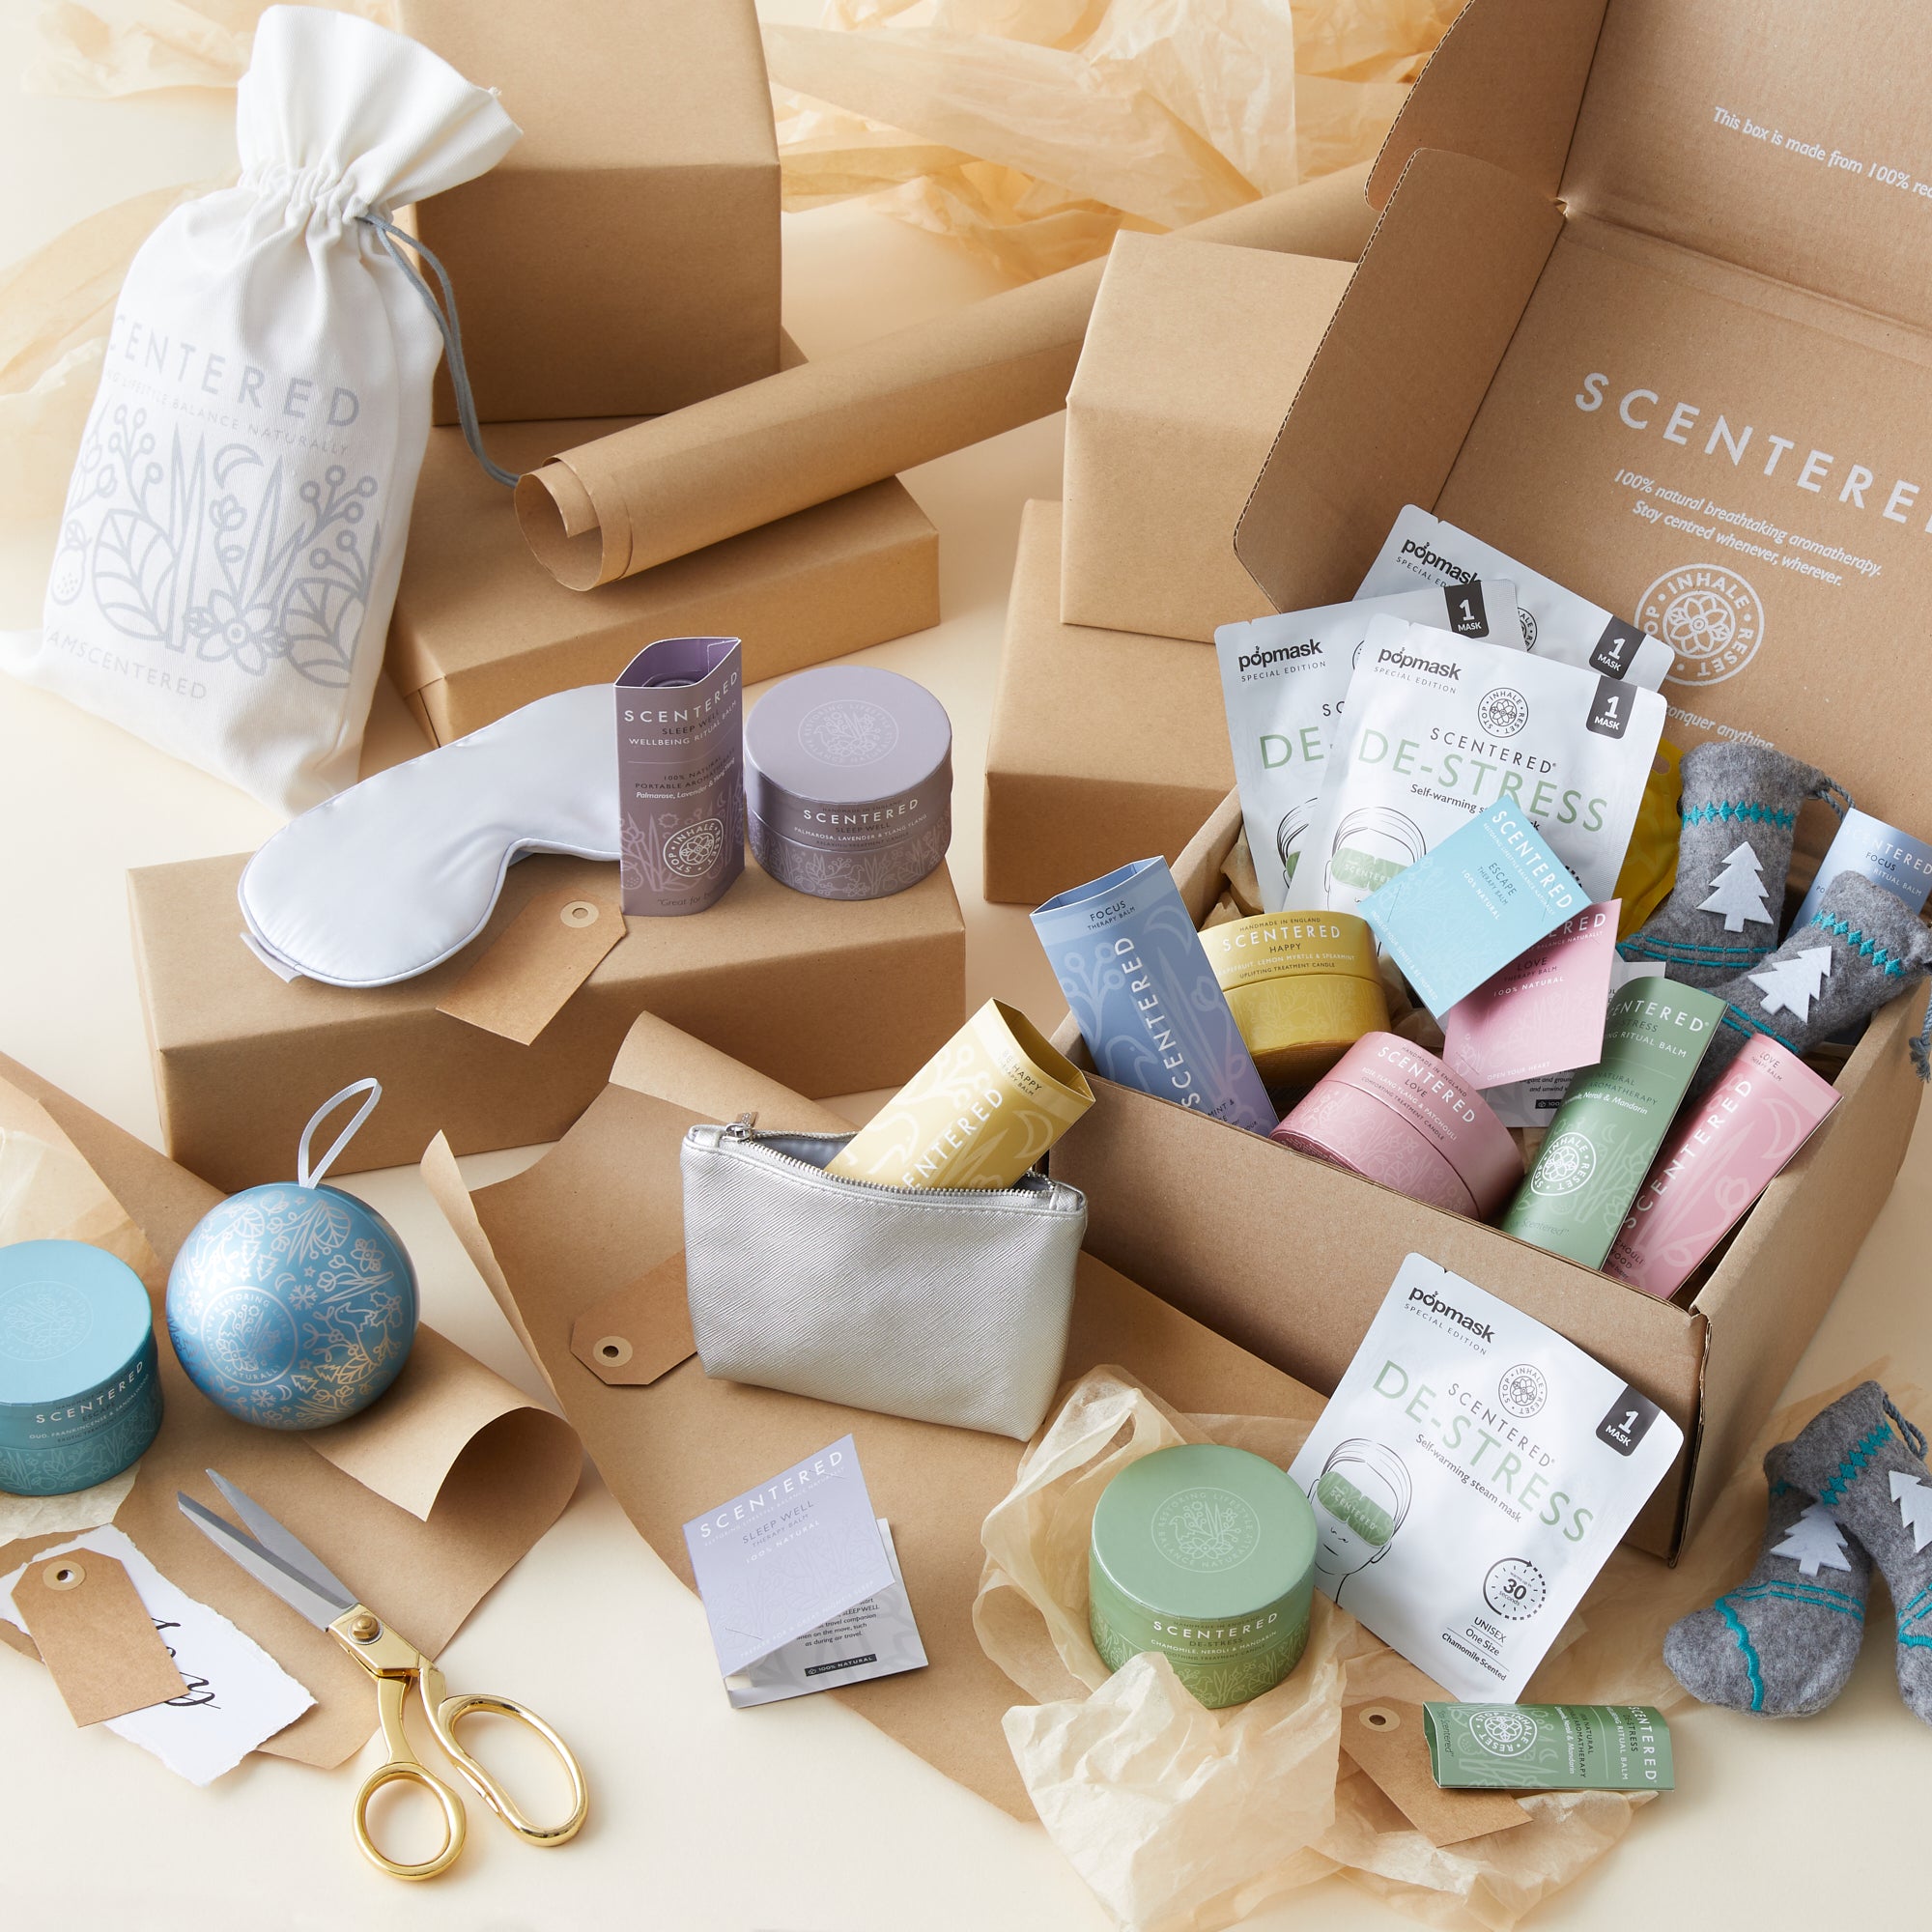 Our Wellbeing Booster Box has returned in time for the colder and gifting season!